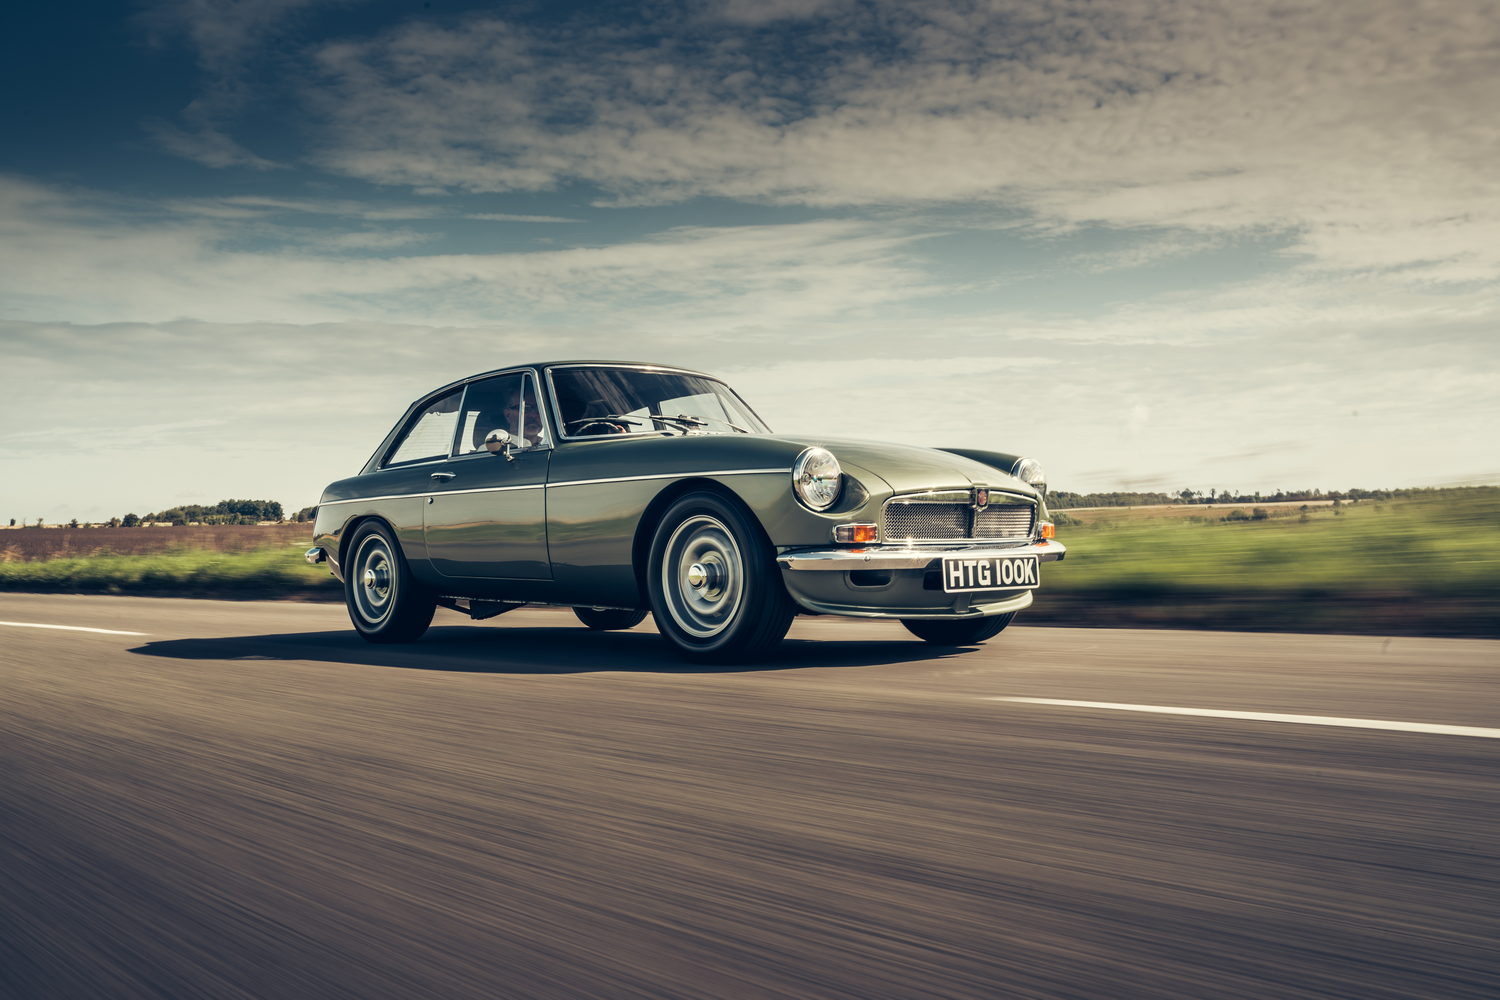 Oxfordshire-based Frontline announces new MGB-based creations. Image by Frontline.